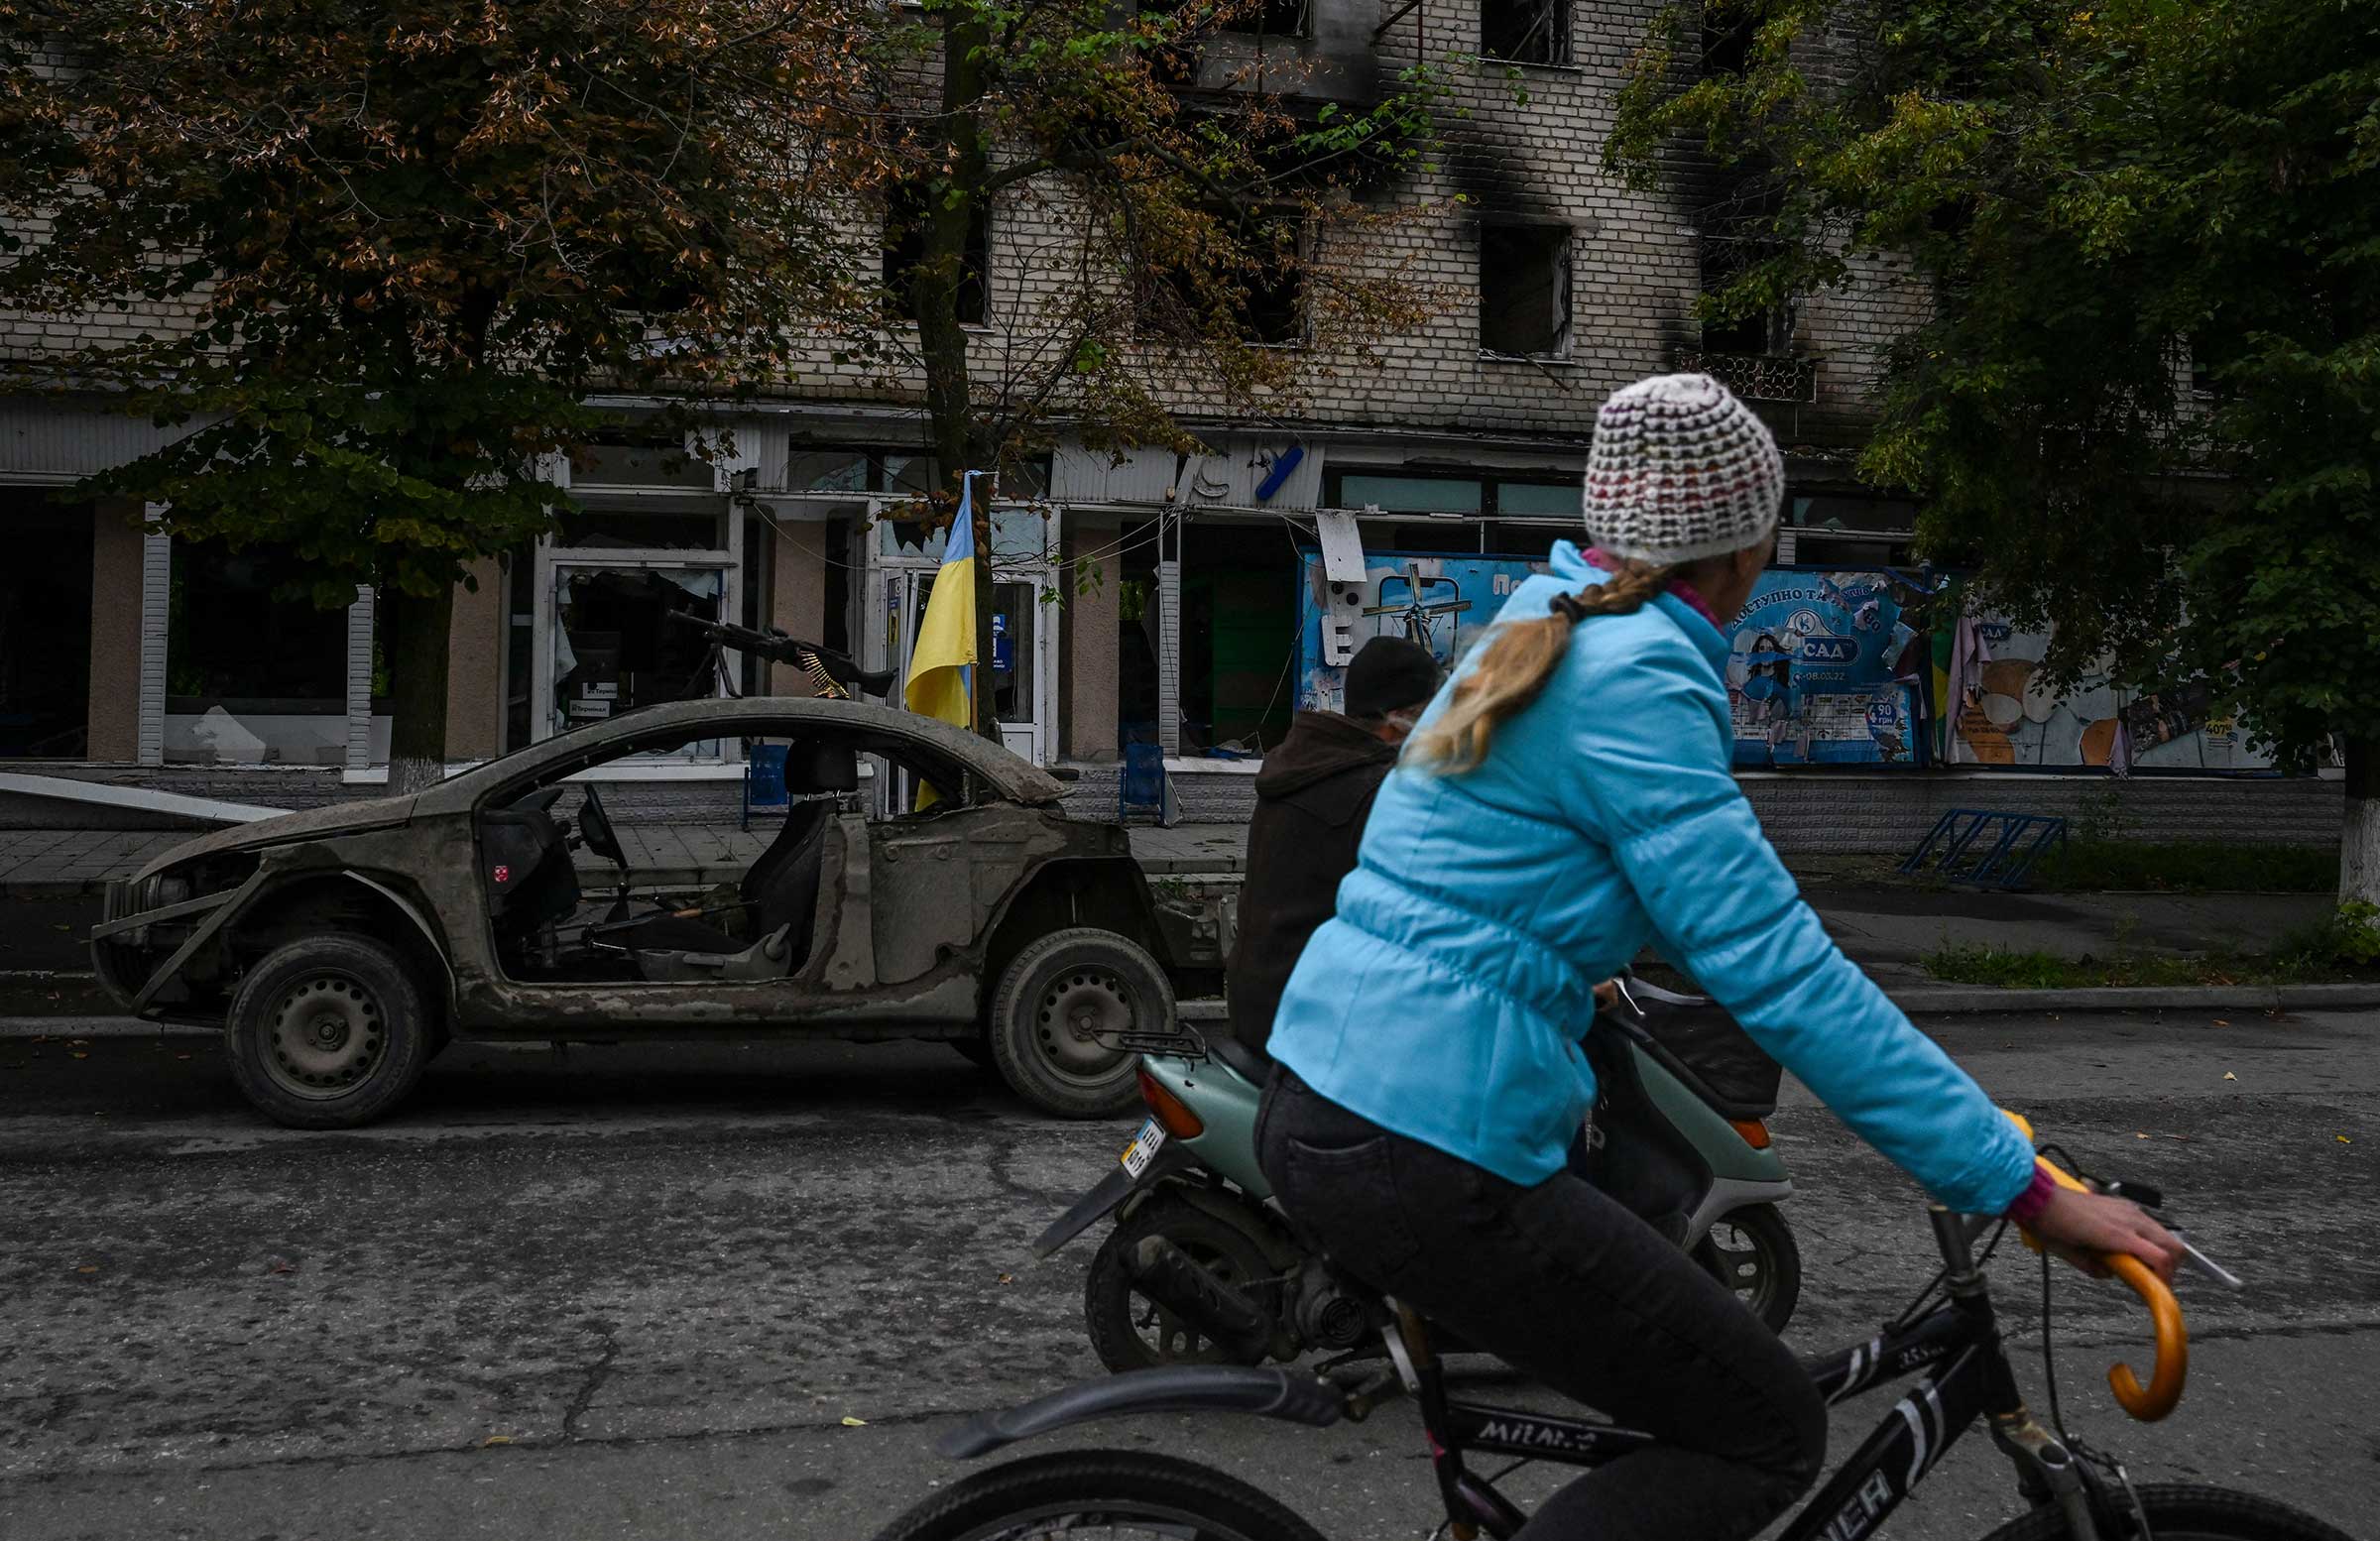 A woman rides a bicycle on a street in Izyum, Sept. 14. (Juan Barreto—AFP/Getty Images)